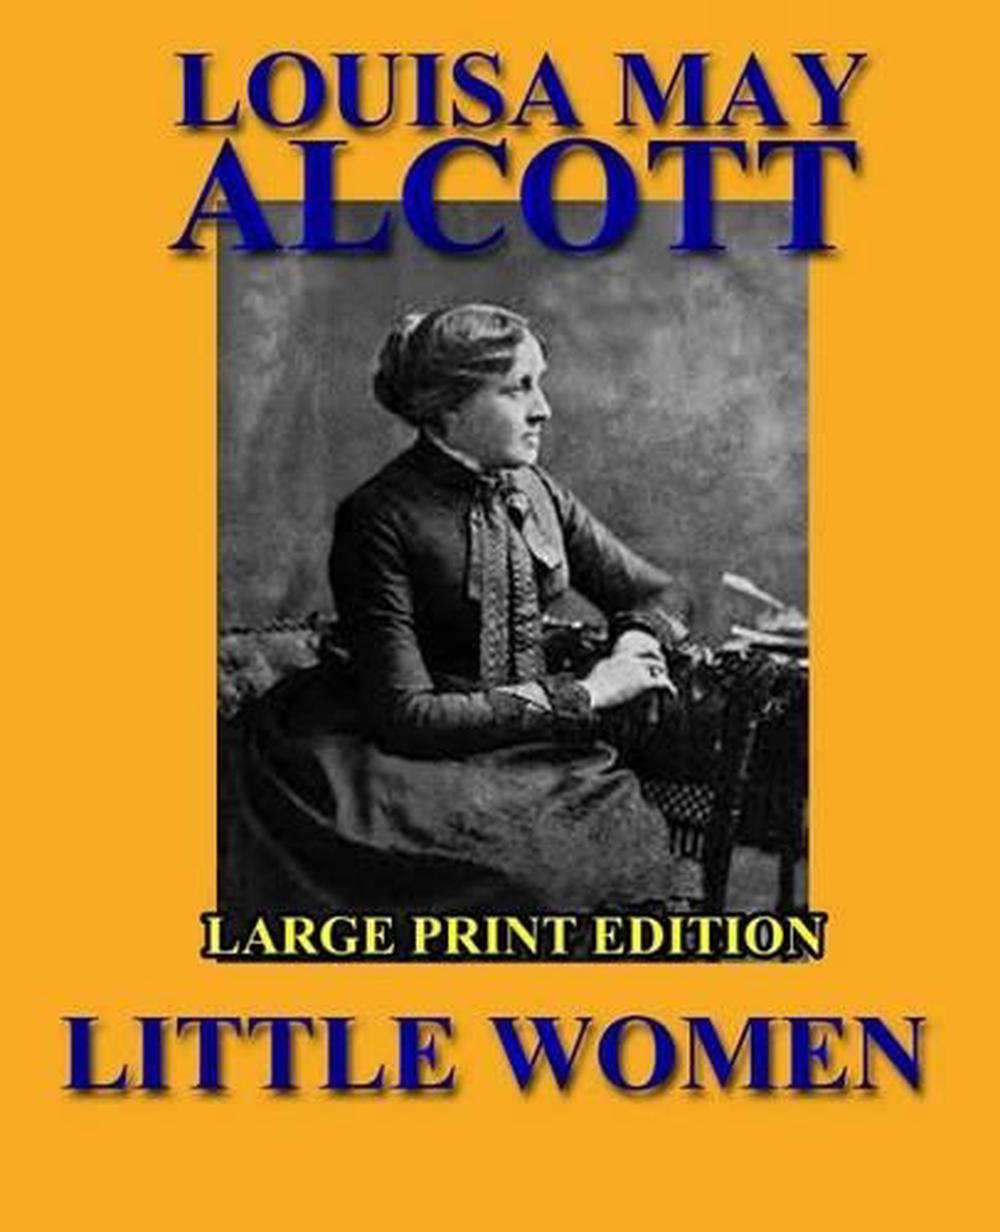 Little Women - Large Print Edition by Louisa May Alcott (English) Paperback Book 9781492747284 ...